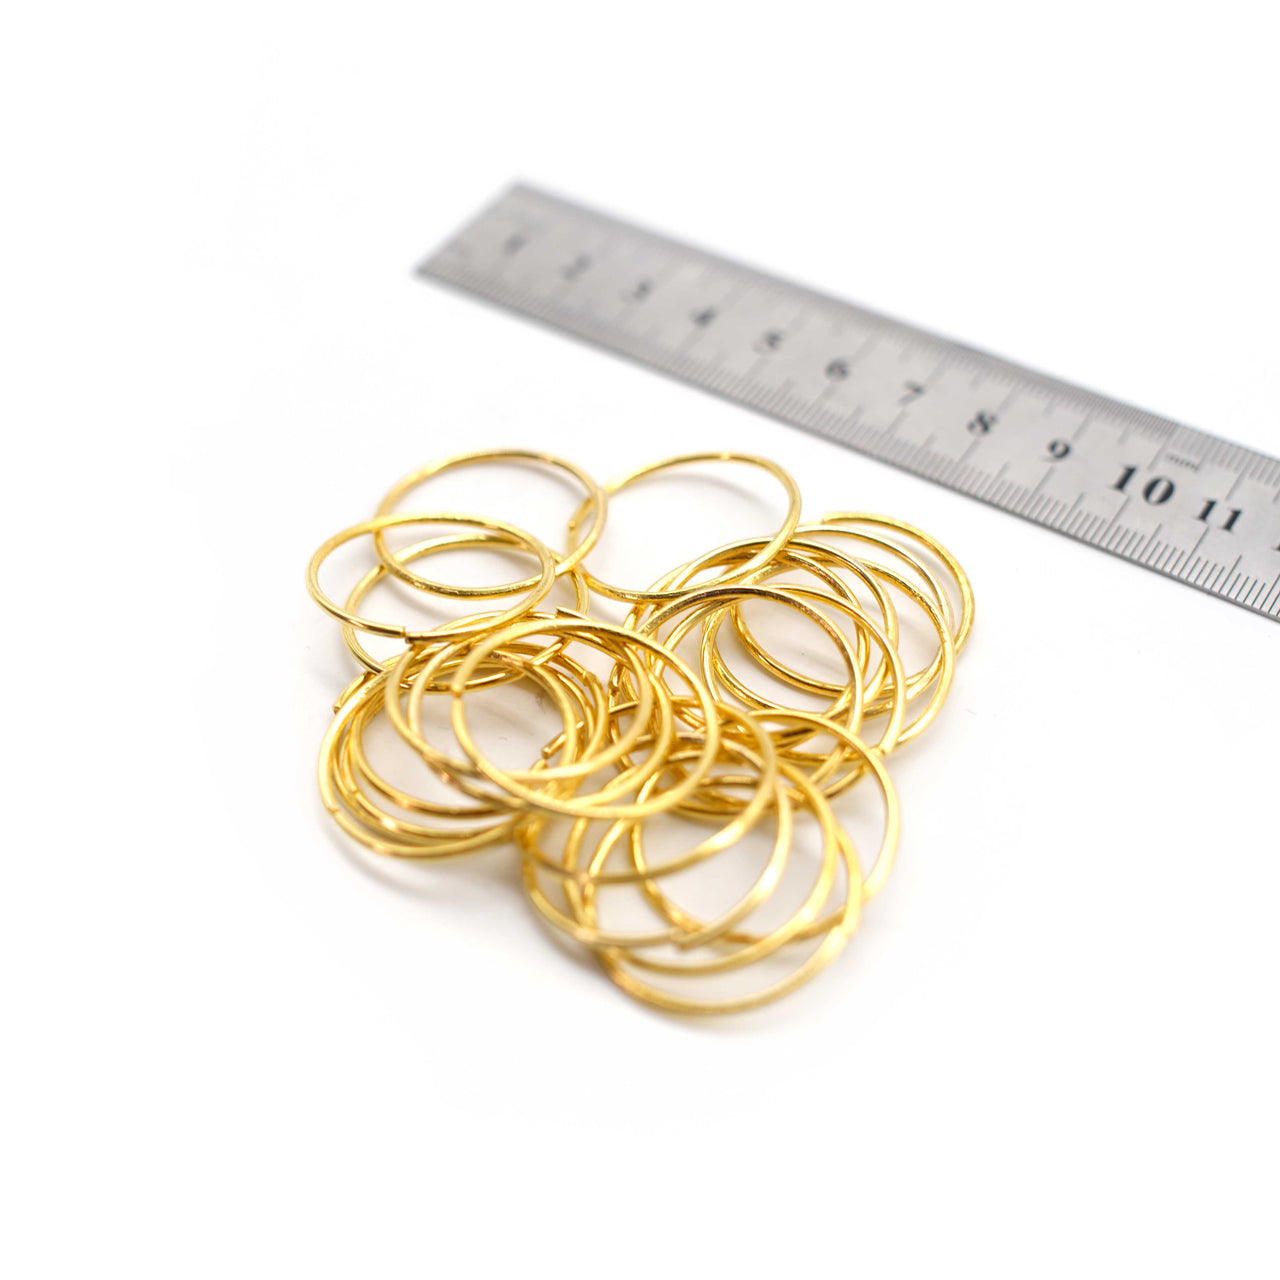 O Rings - 28mm - Gold - Pack of 10 (Thin)